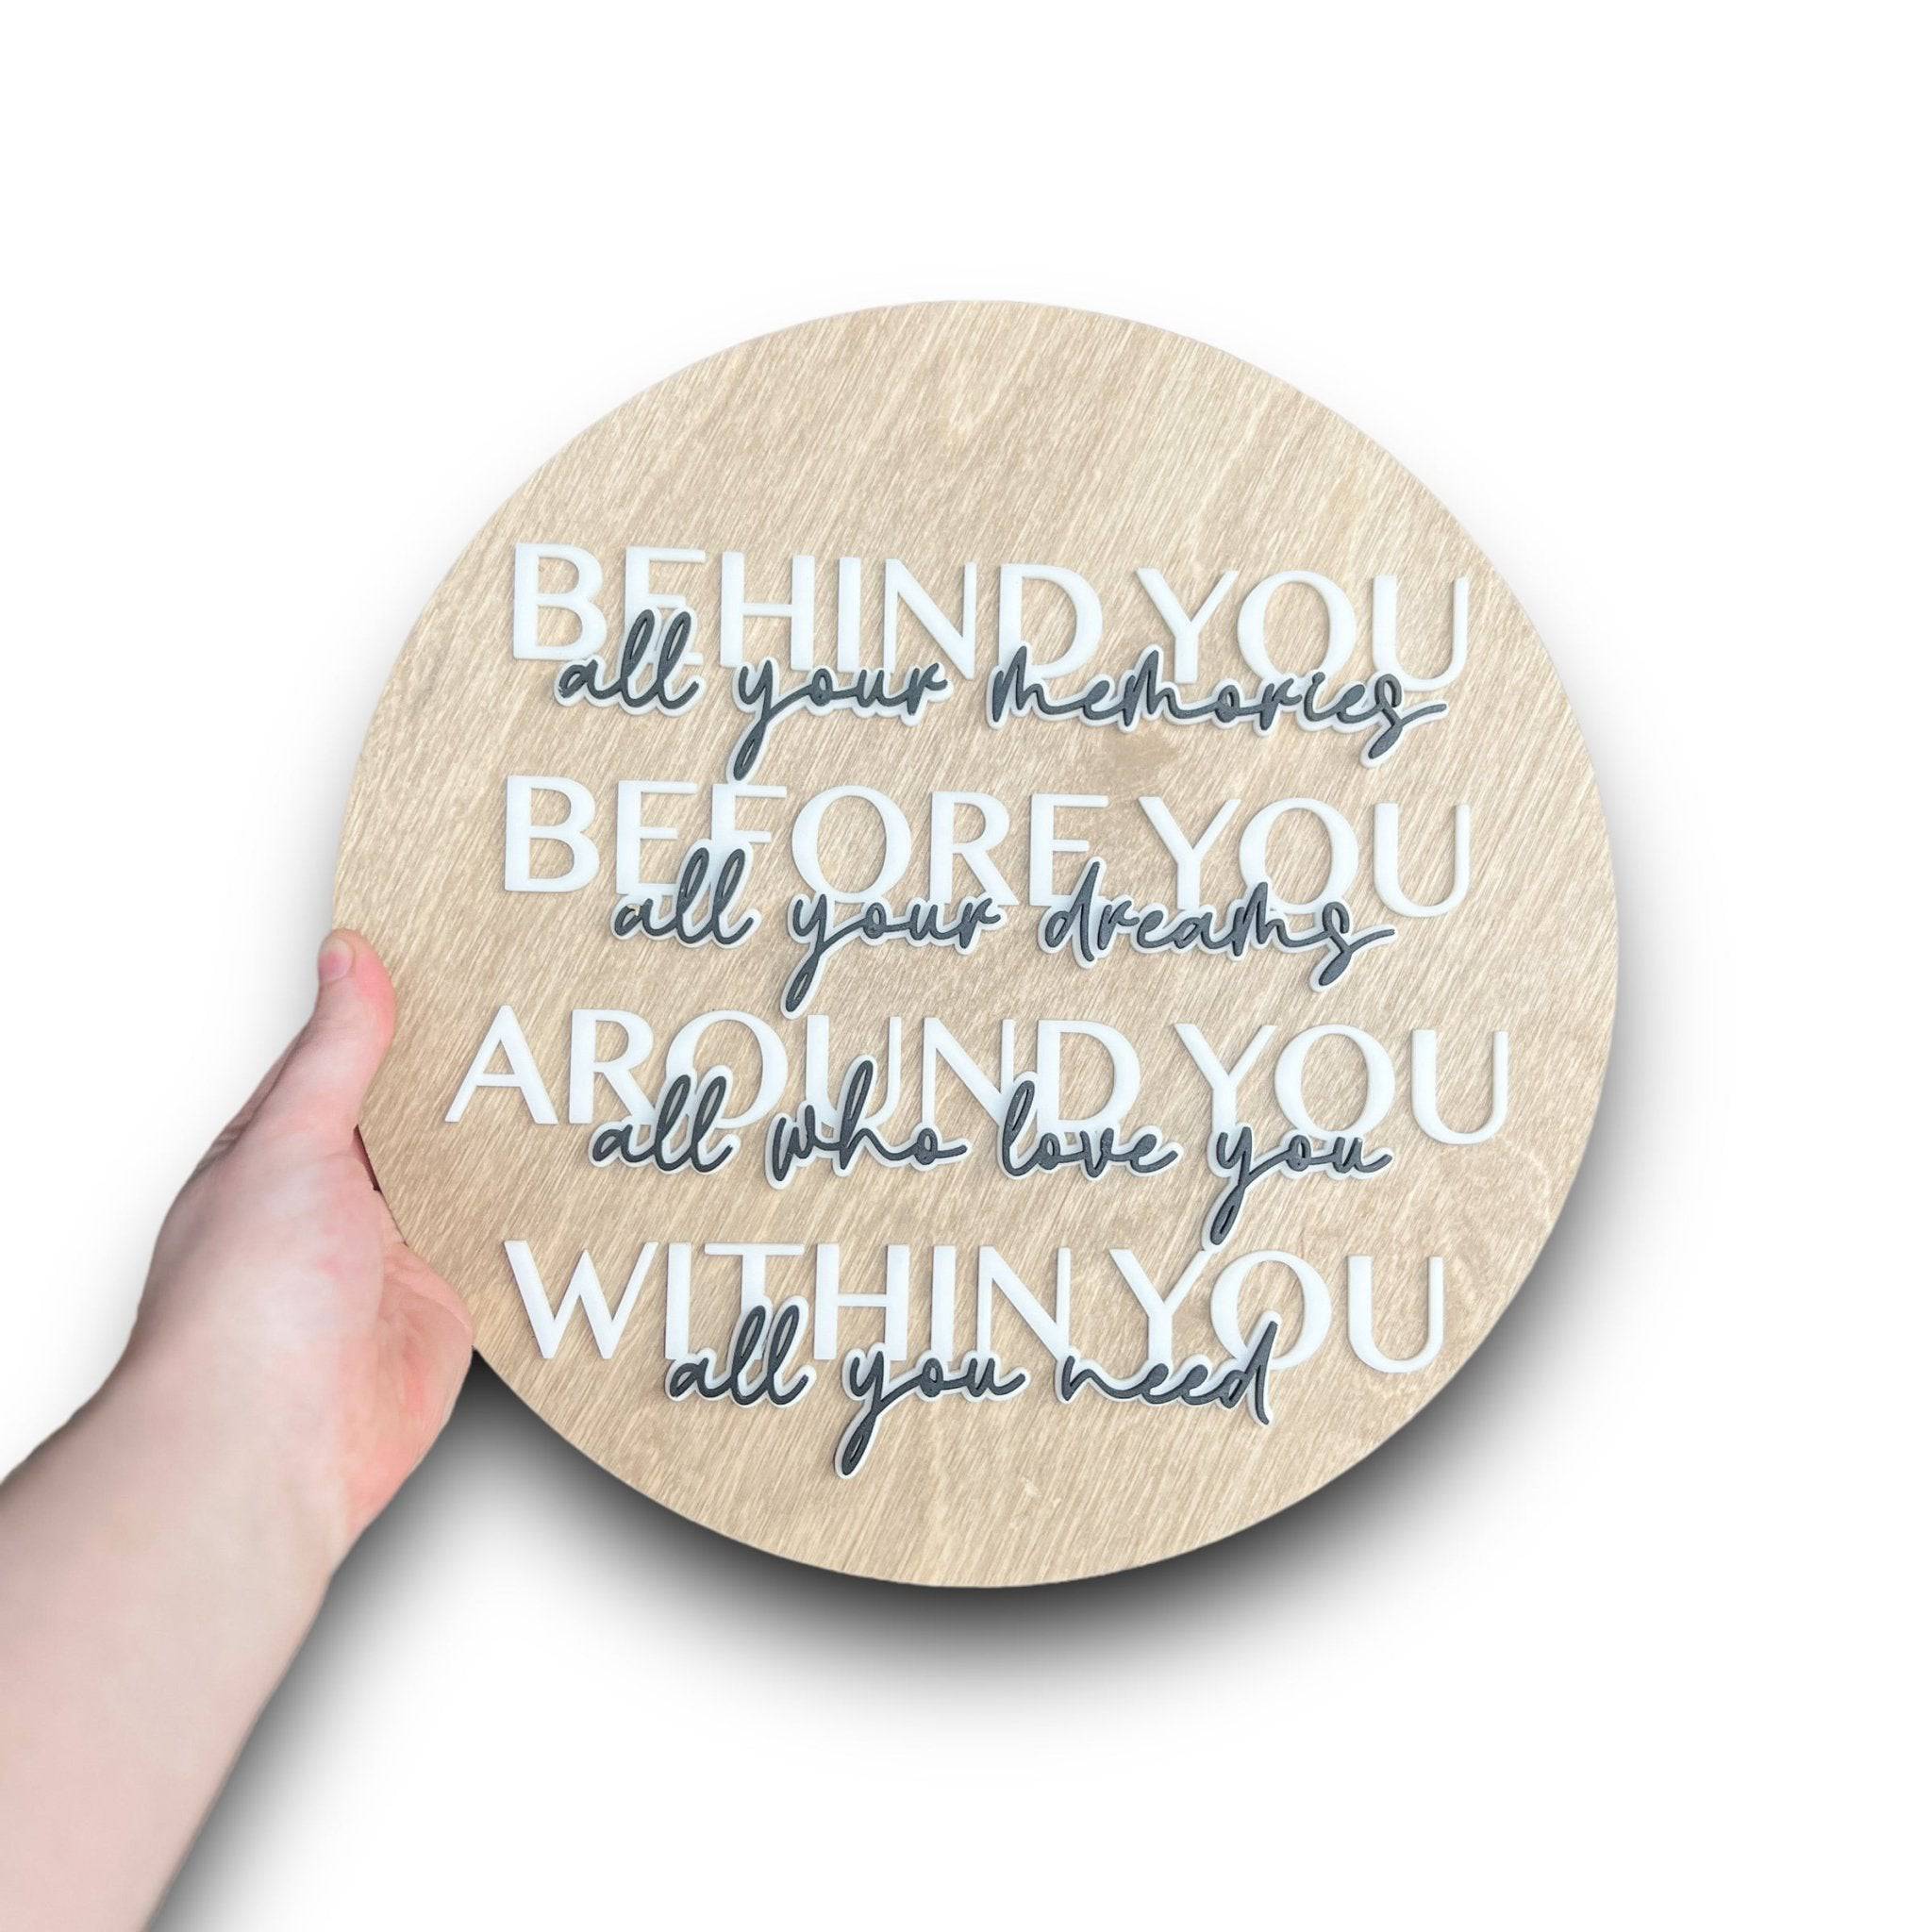 Behind You All Your Memories, Before You All Your Dreams 3D Wood Sign - Sticks & Doodles